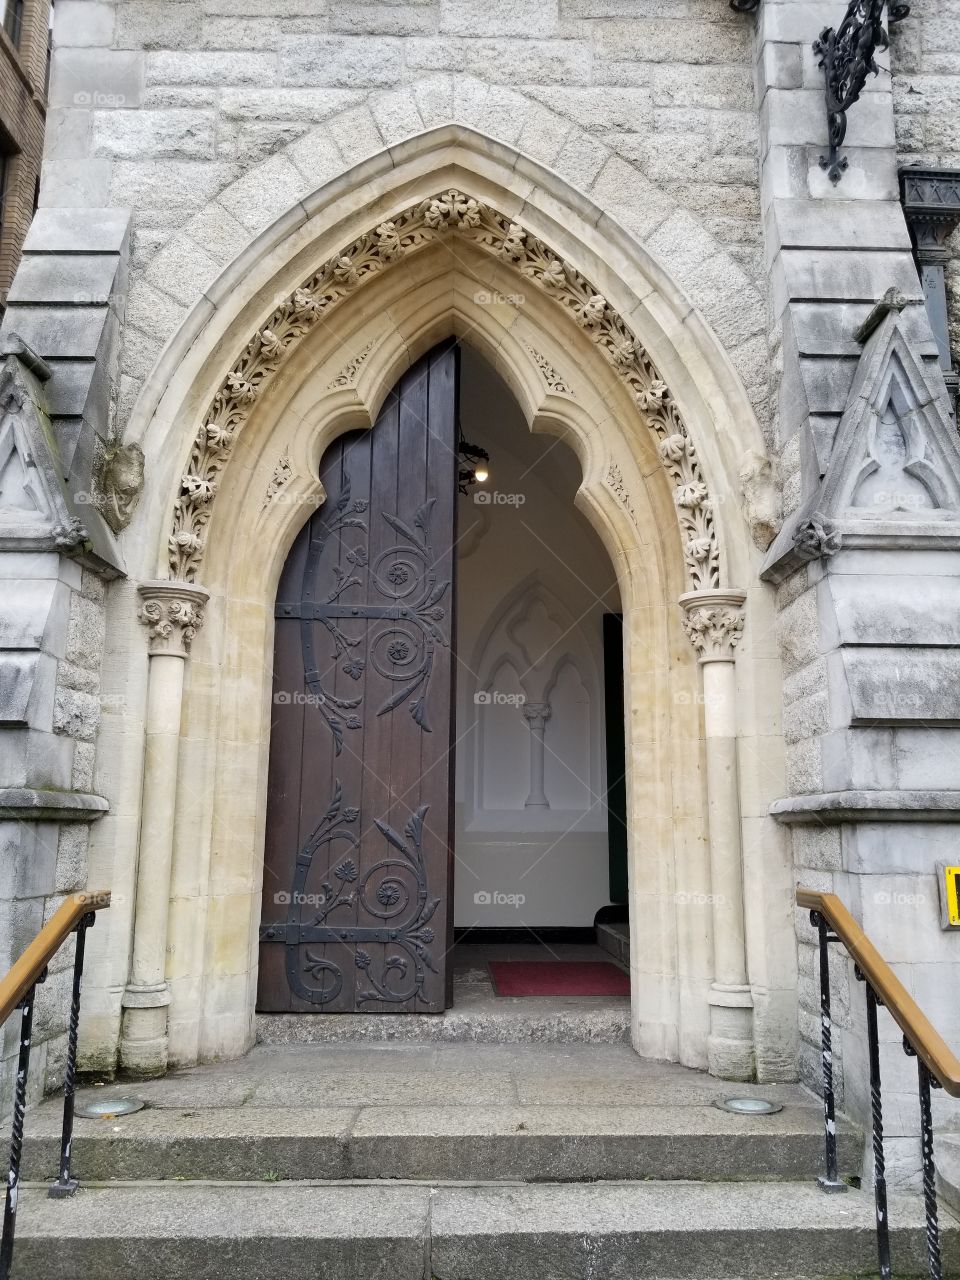 Perception
As one door closes, another is opening. Opportunity, hope, & faith are in the eye, the soul, of the beholder. This place remains symbolic of hope & triumph. Irish peoples of the past swayed their luck from English rule, through this door.